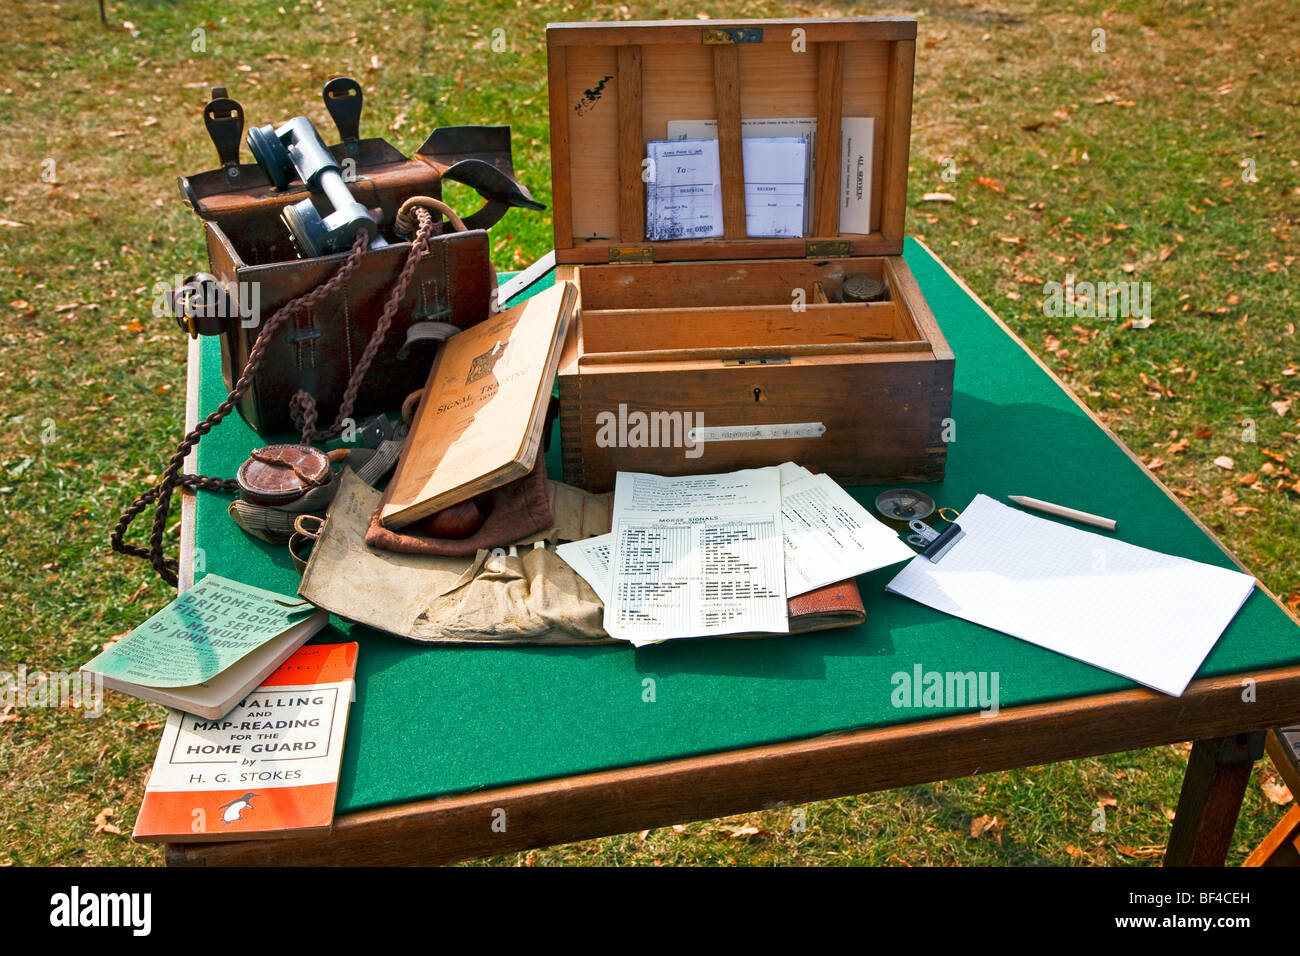 Home Guard war memorabilia displaying a field phone and signal manuals on a table at Goodwood west Sussex, Engand, UK 2009 Stock Photo